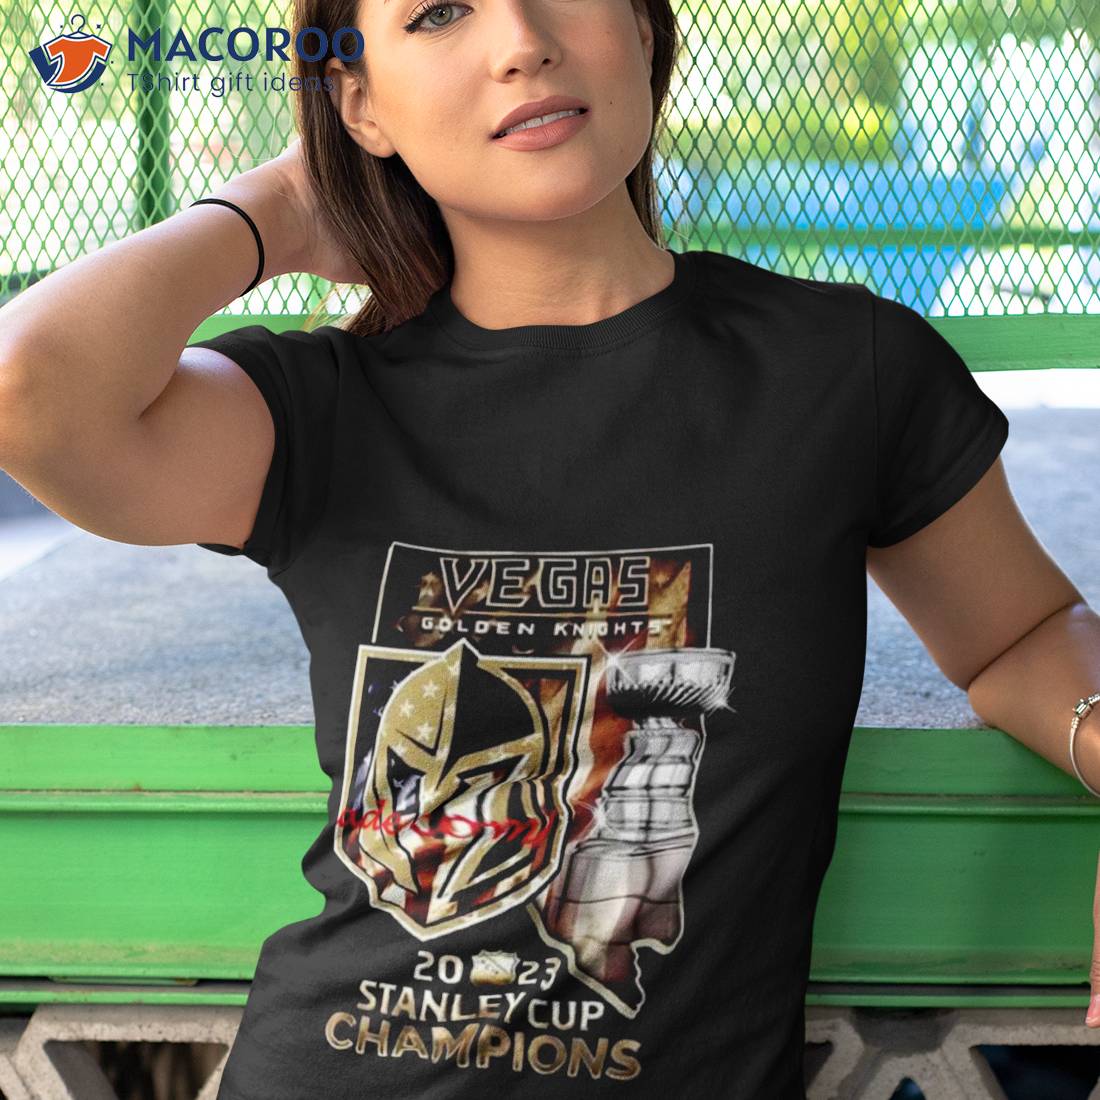 https://images.macoroo.com/wp-content/uploads/2023/06/vintage-2023-stanley-cup-champions-golden-knights-shirt-tshirt-1.jpg